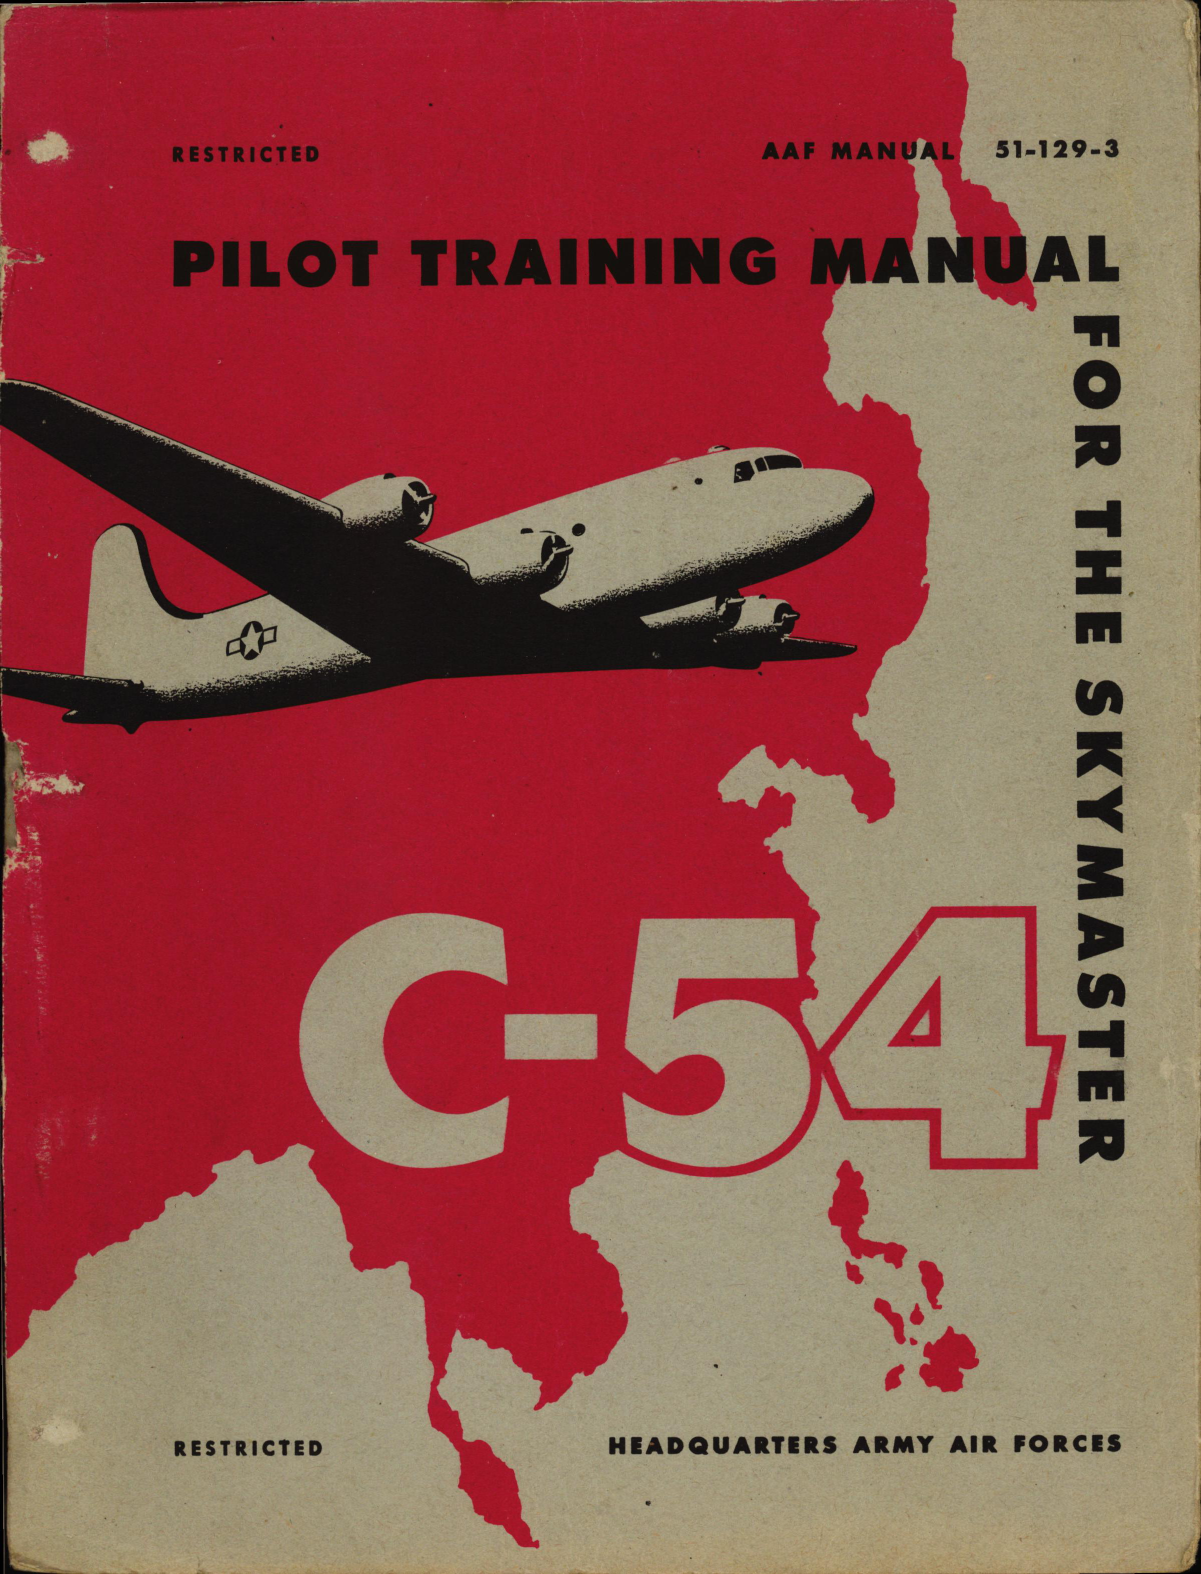 Sample page 1 from AirCorps Library document: Pilot Training Manual for the C-54 Skymaster